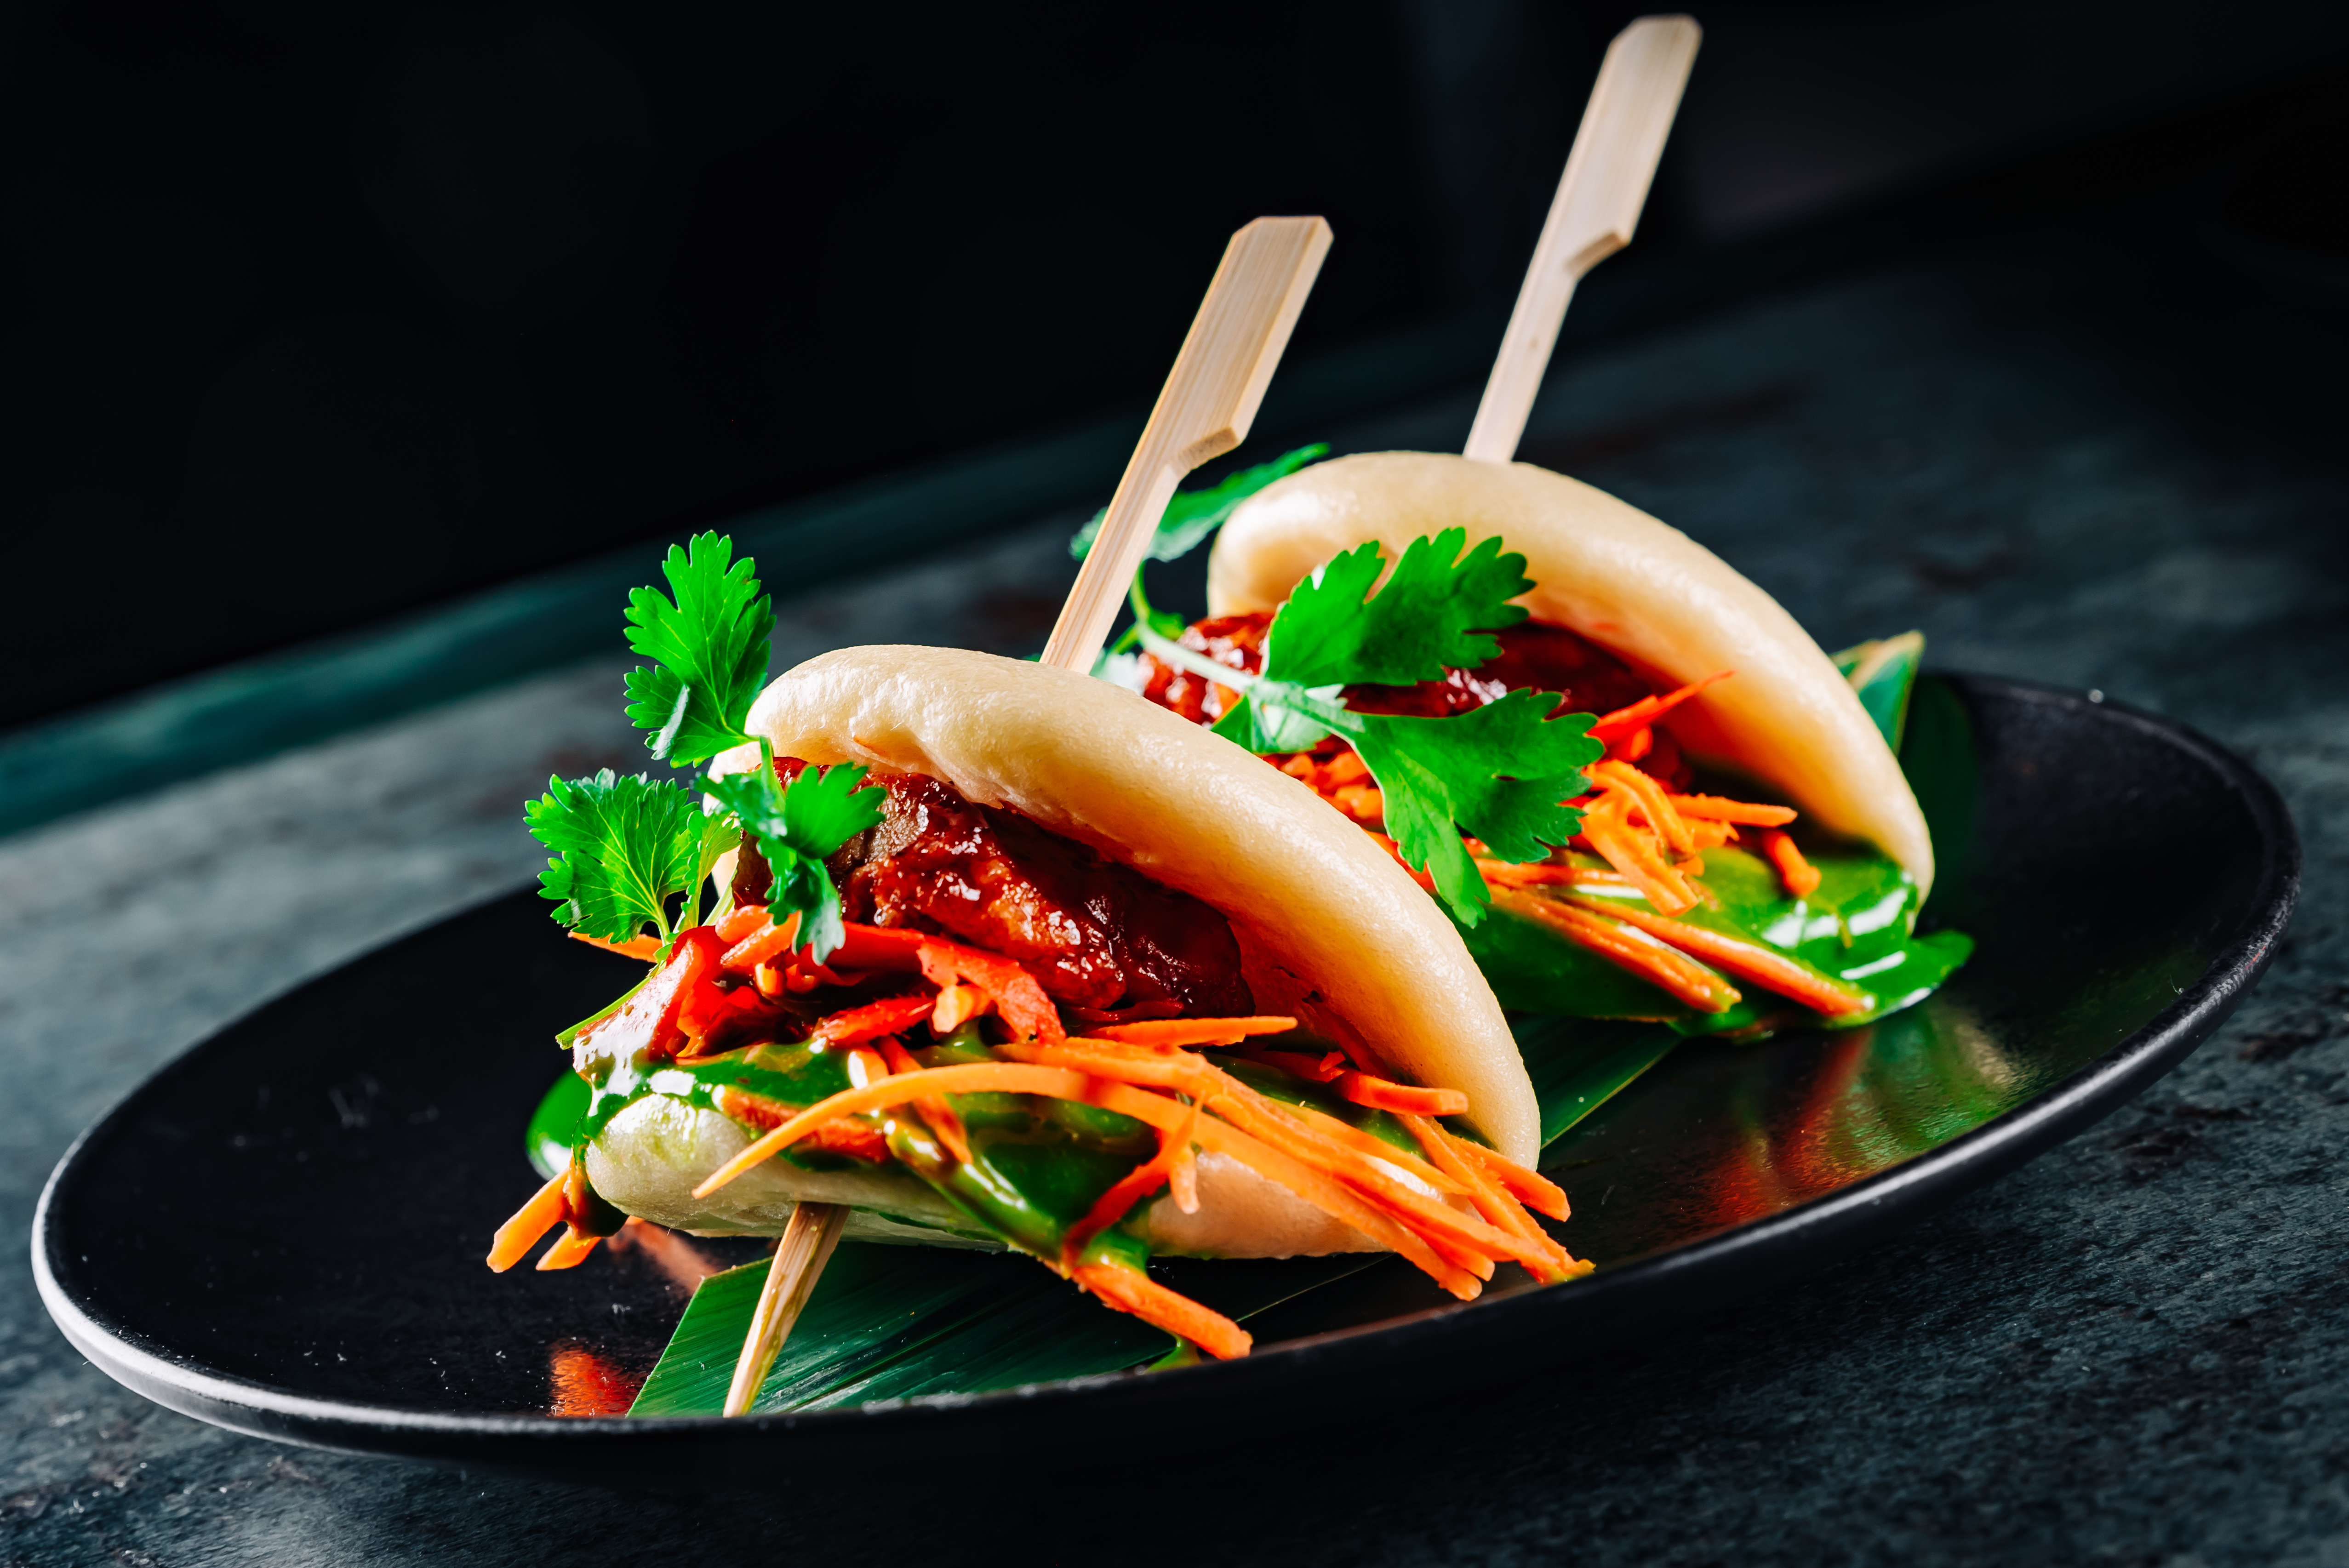 With chicken in hoisin sauce, pickled ginger, fresh carrot and ginger mayonnaise